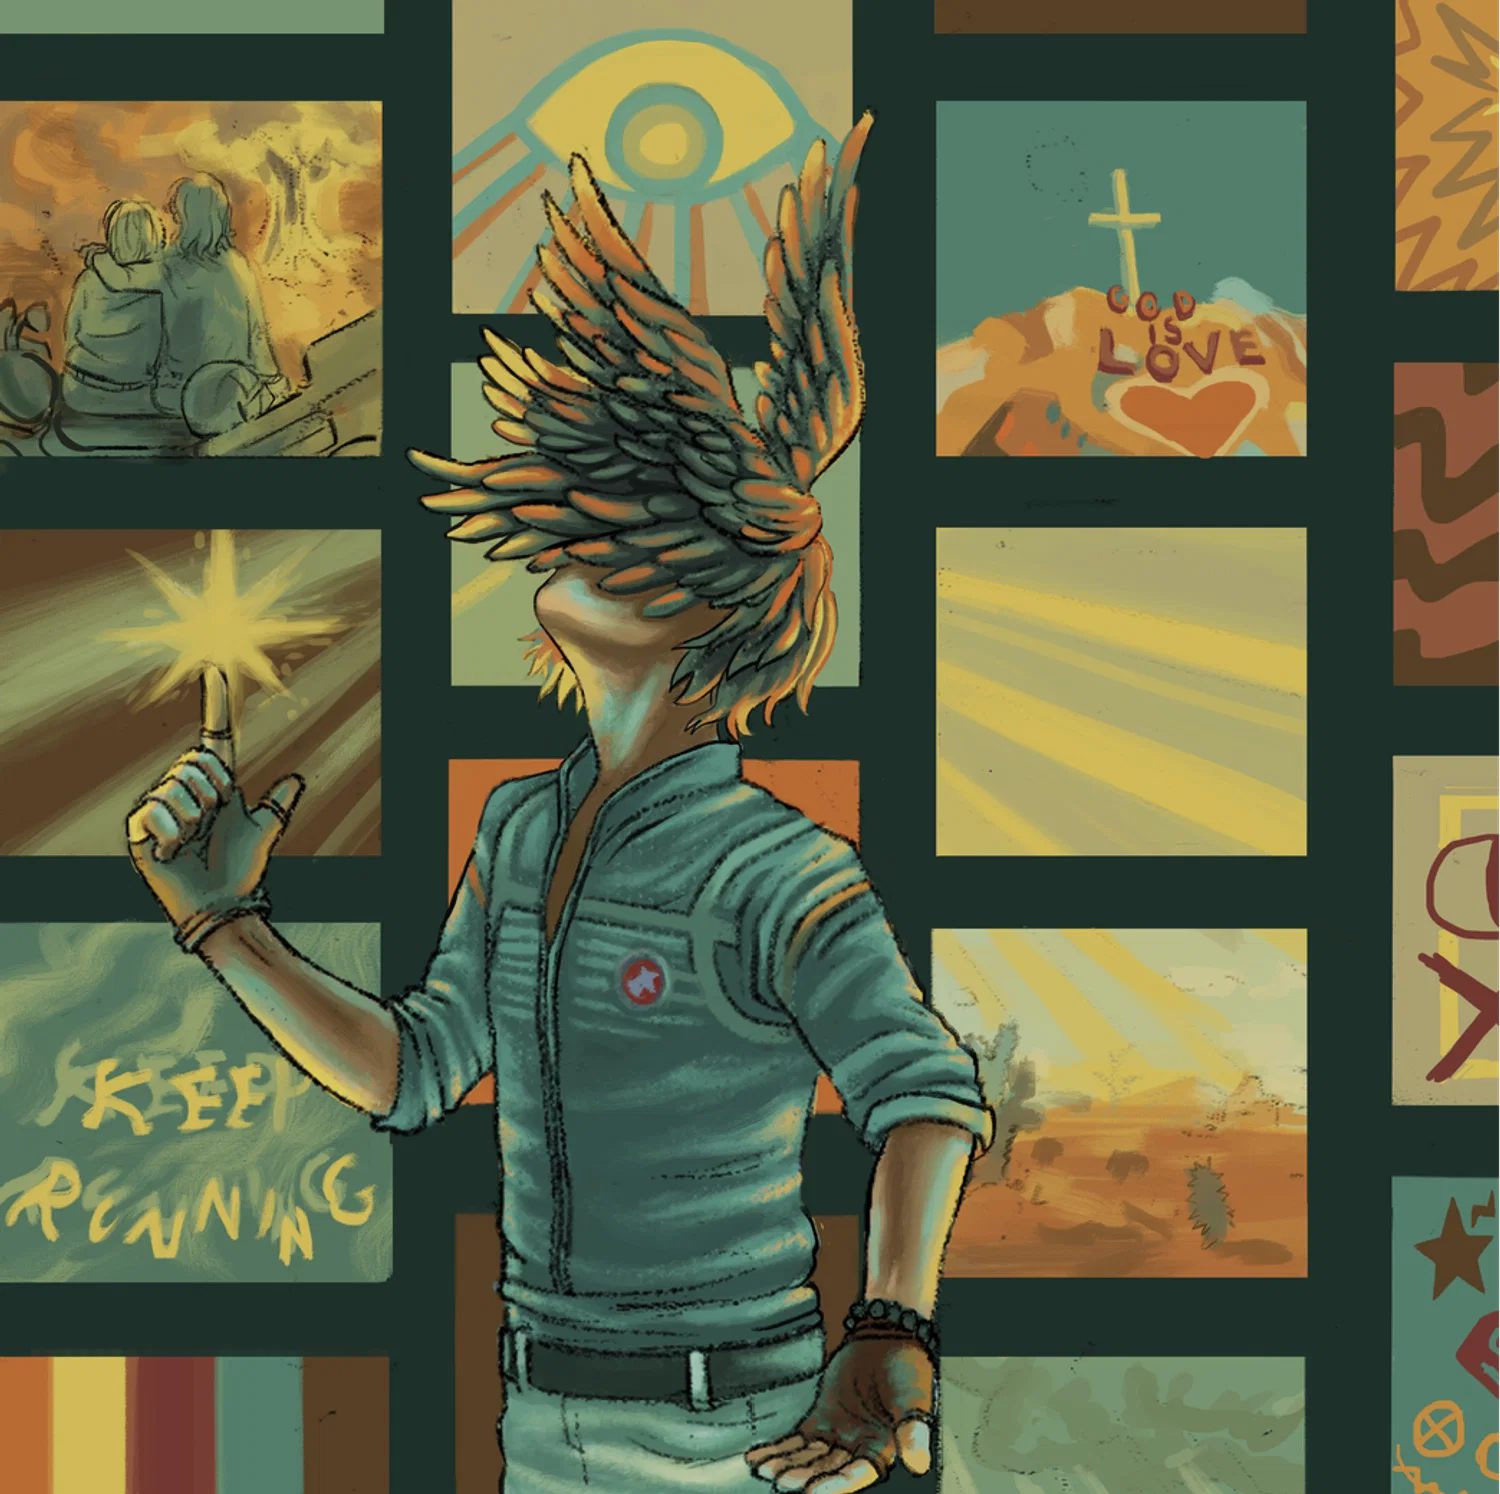 A digital illustration of a character in front of many screens. The character is depicted from the waist up and has wings sprouting out of his hair, covering his face. He is pointing and looking upwards, with a light positioned above his finger. The screens depict various text and scenes set in a desert. Text on the bottom left reads "Keep Running", and Salvation Mountain is depicted on the top right.